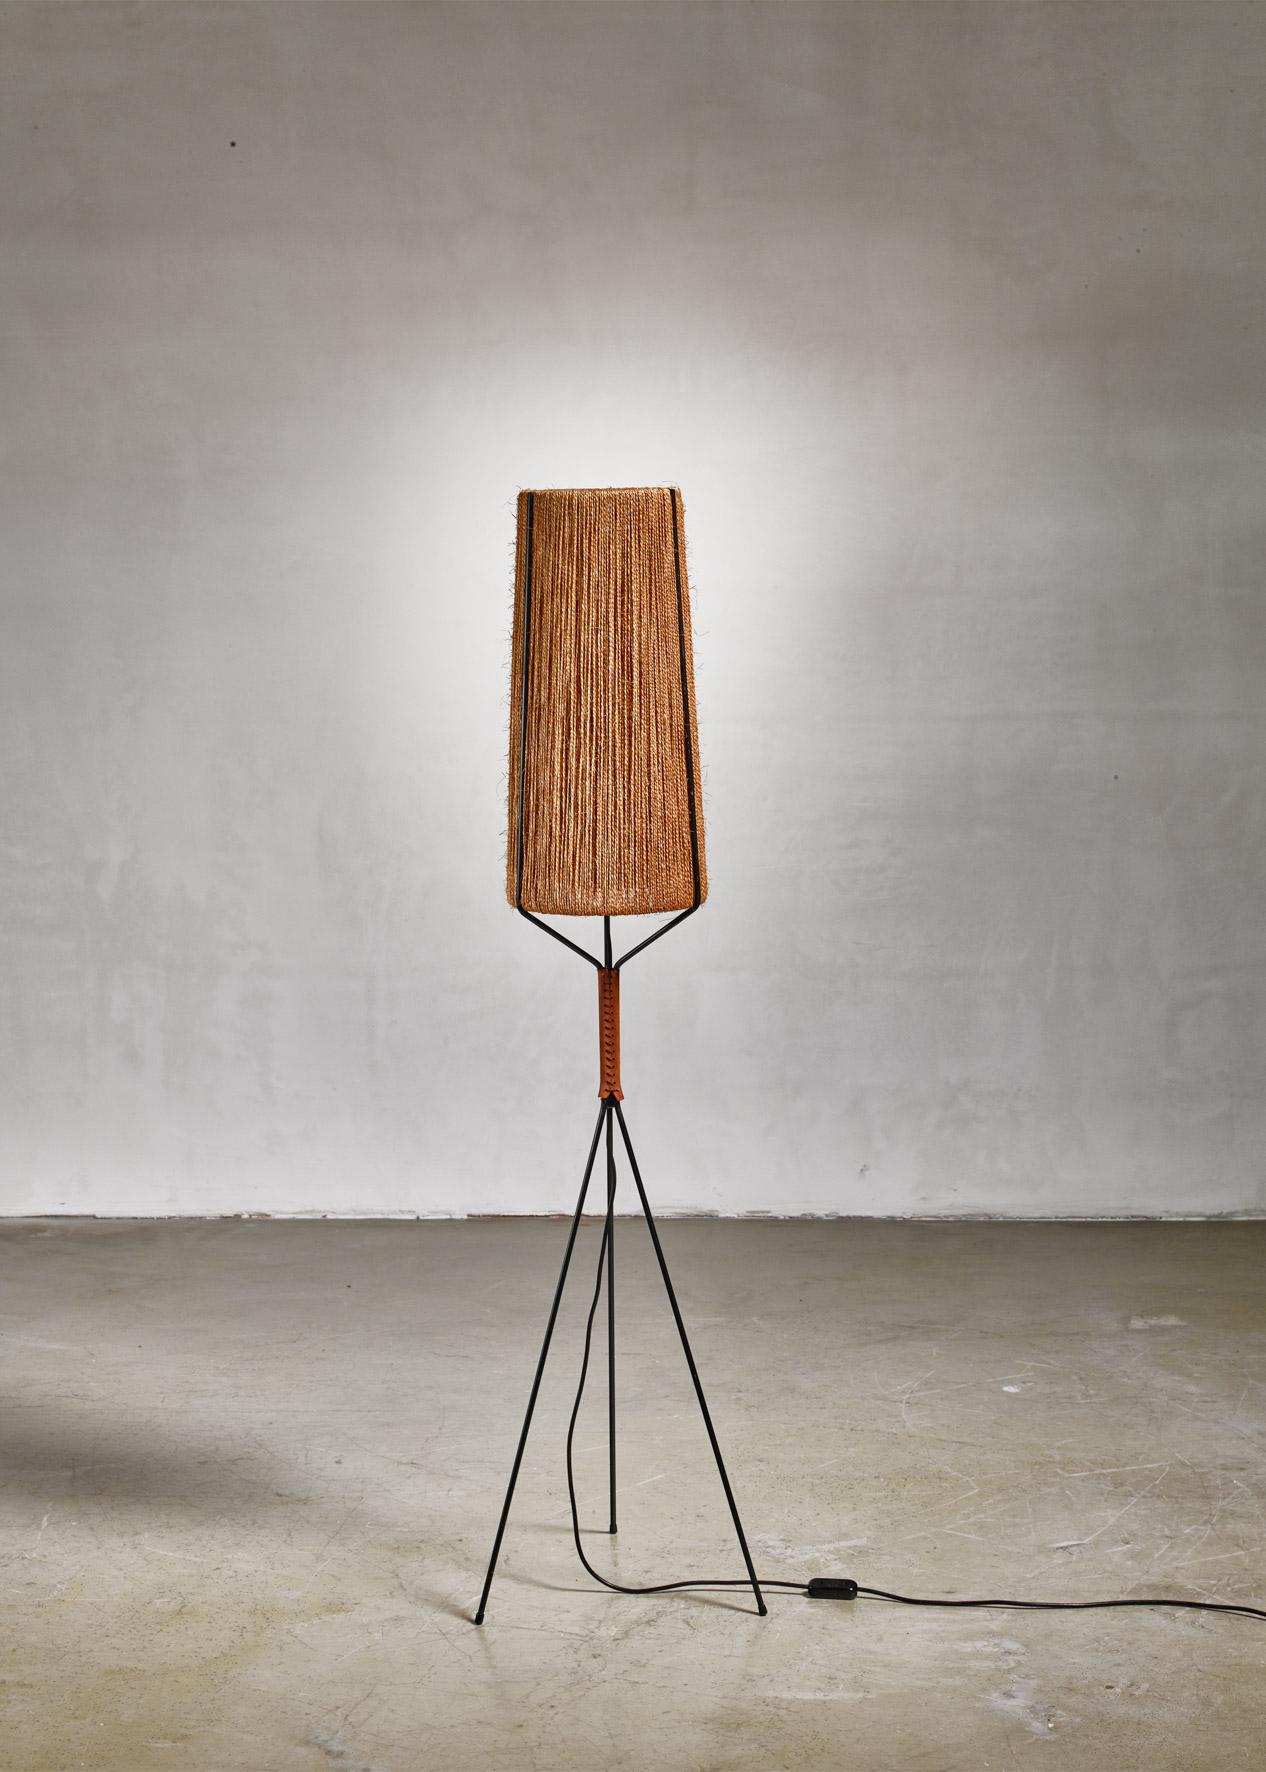 A Danish floor lamp in the manner of Ib Fabiansen or Svend Aage Holm-Sørensen. The lamp has a black lacquered steel tripod base with a leather part and a woven rope cylindrical shade.